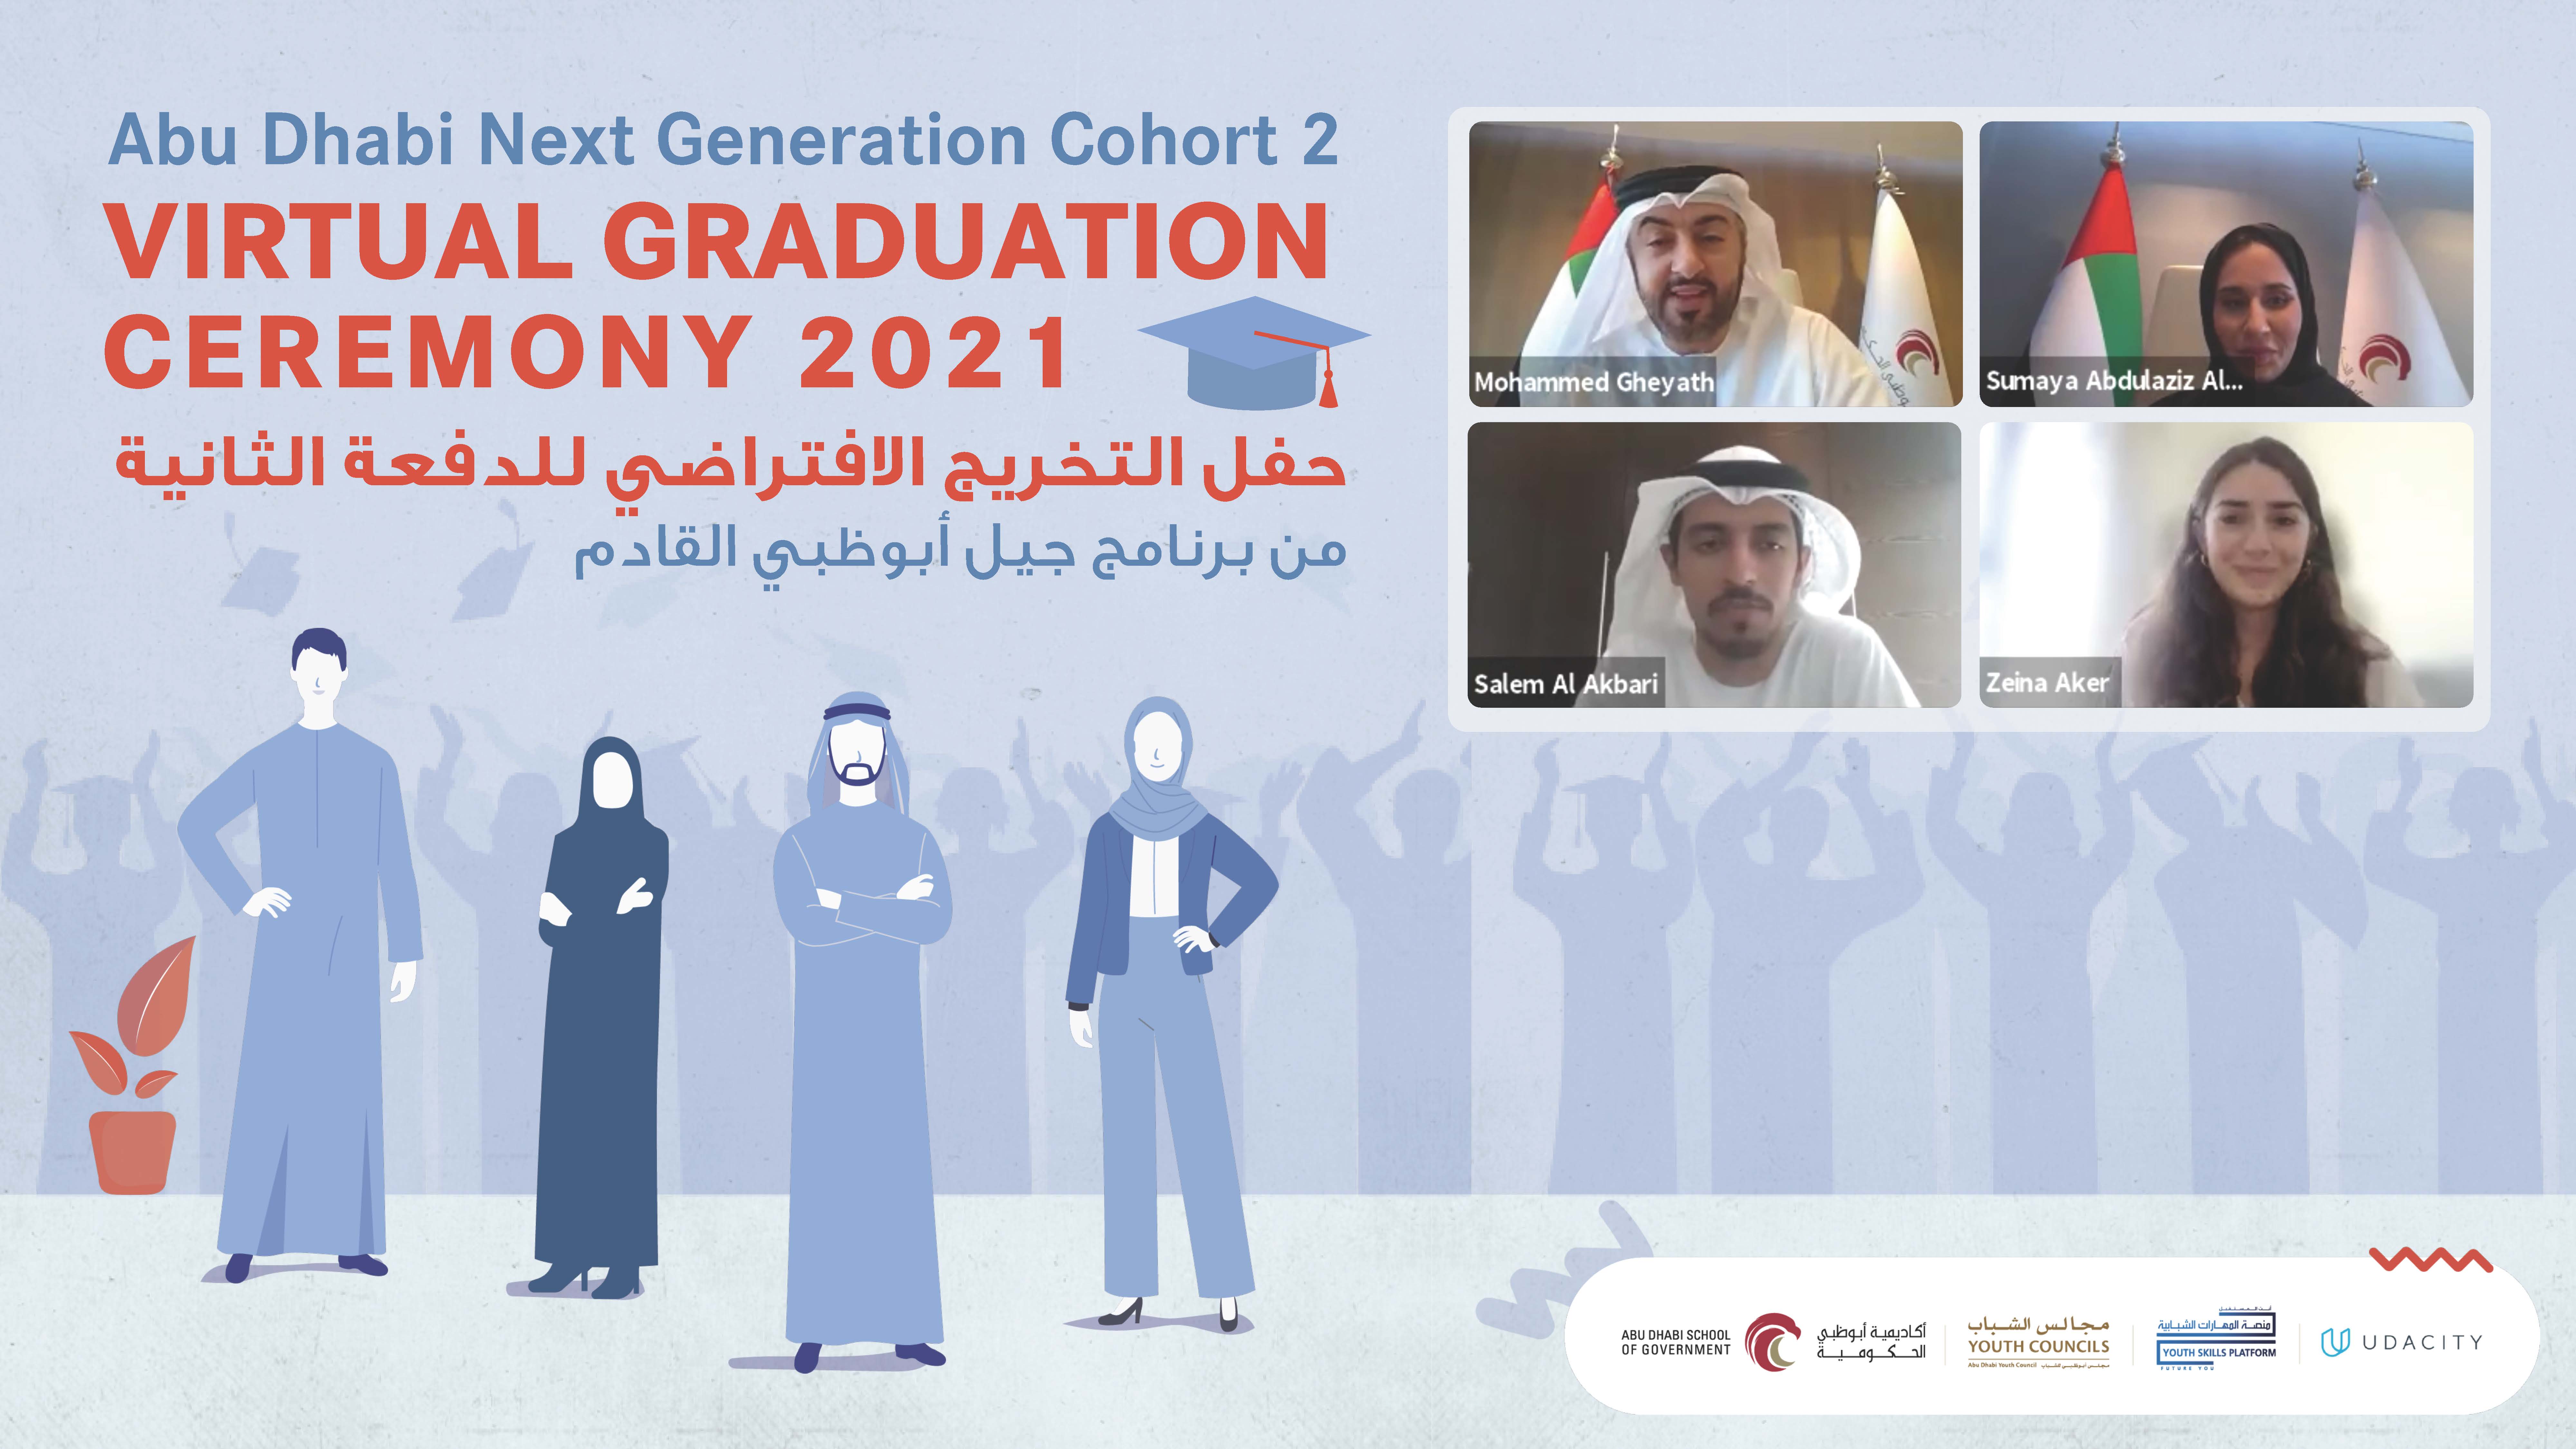 The Abu Dhabi School Of Government And The Abu Dhabi Youth Council Celebrates The Second Cohort Of The ‘Abu Dhabi Next Generation’ Graduates